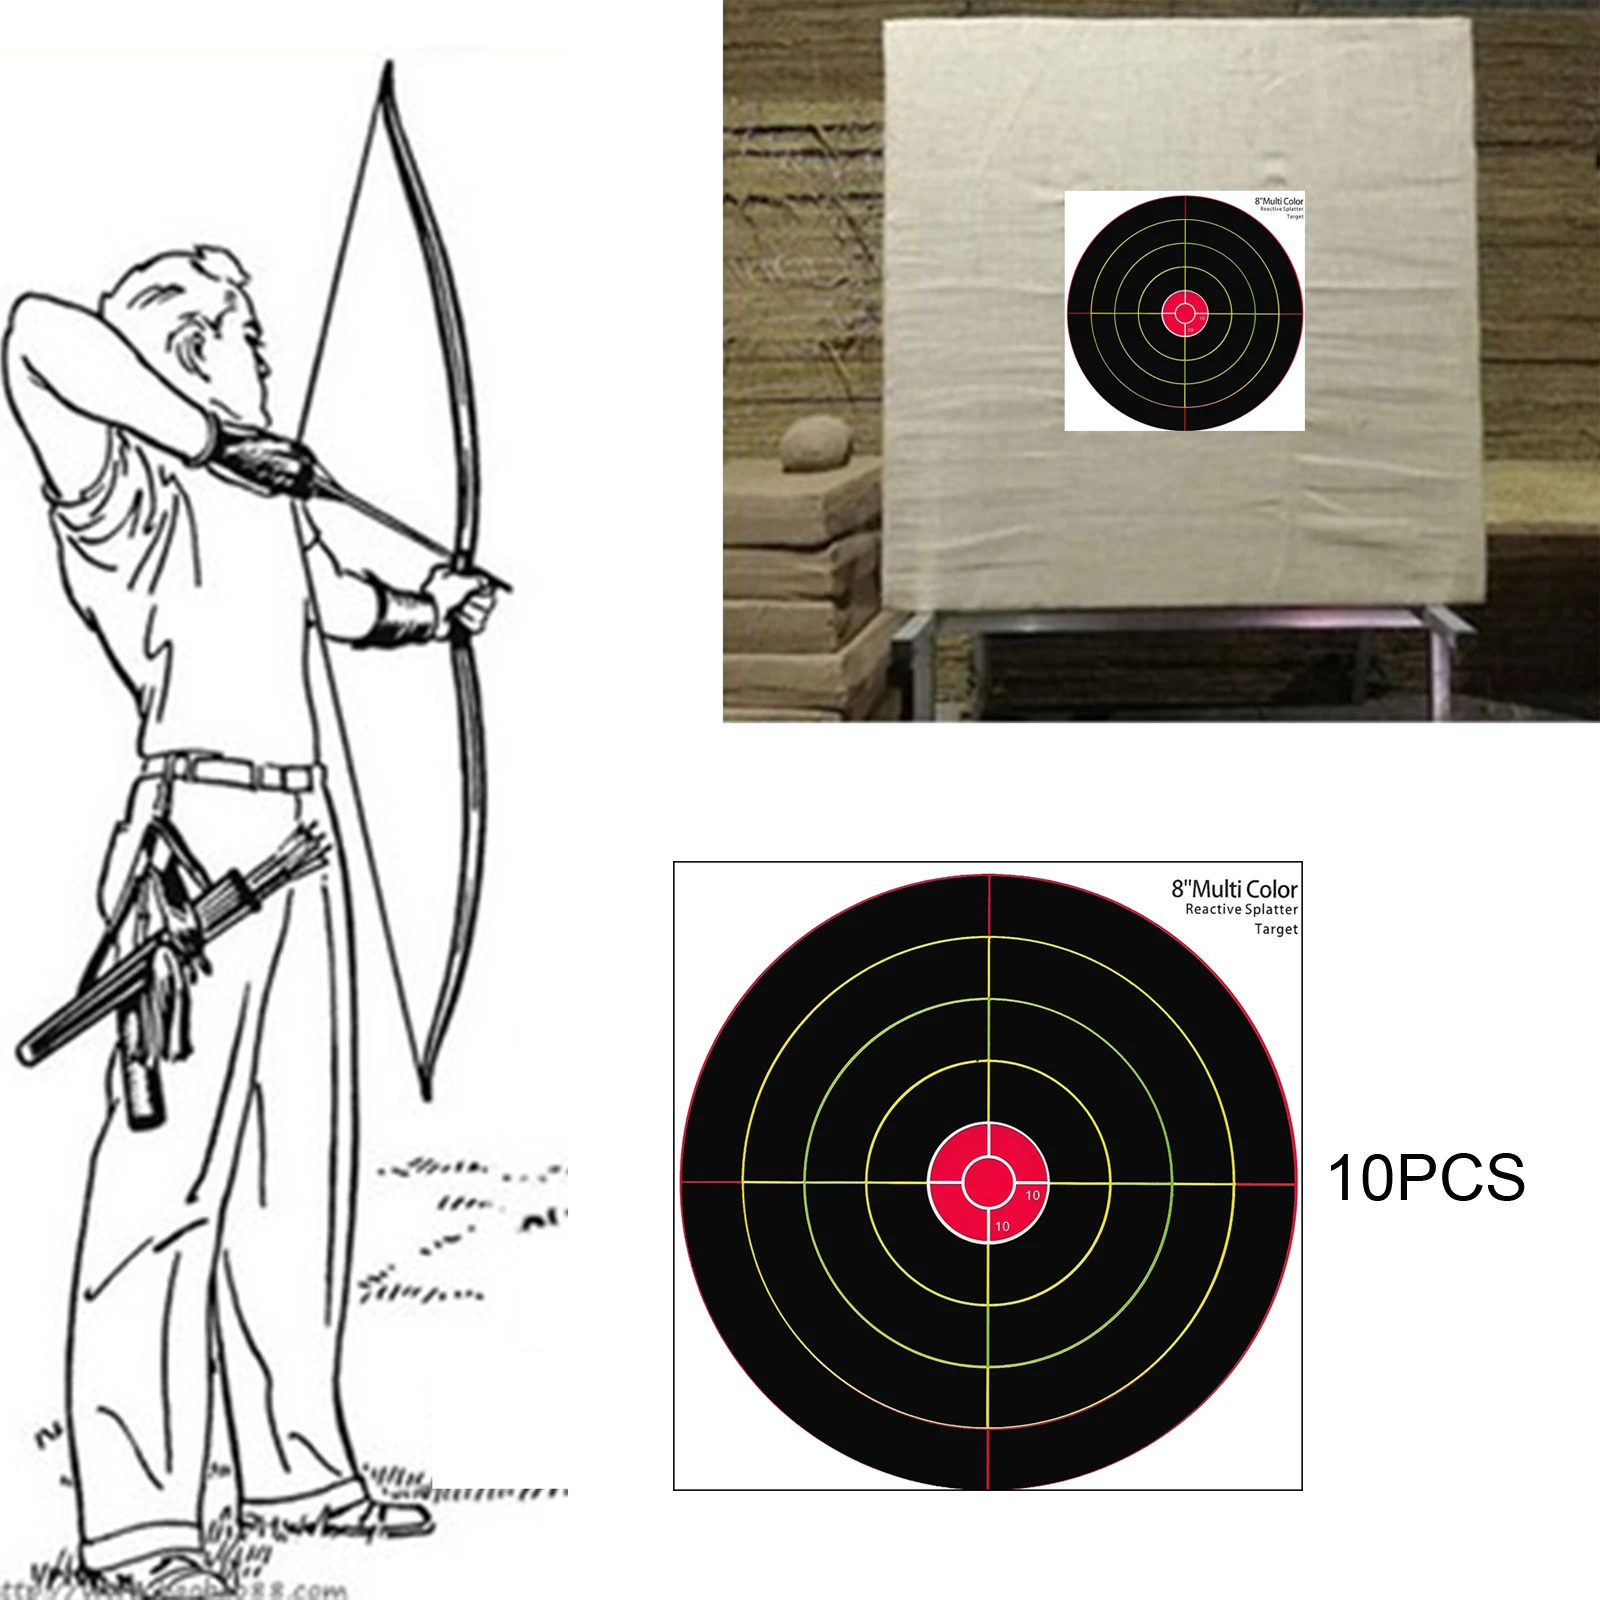 10pcs 20cm Paper Target Stickers Adhesive Reactivity Shoot Targets Outdoor Shooting Practice Hunting Training